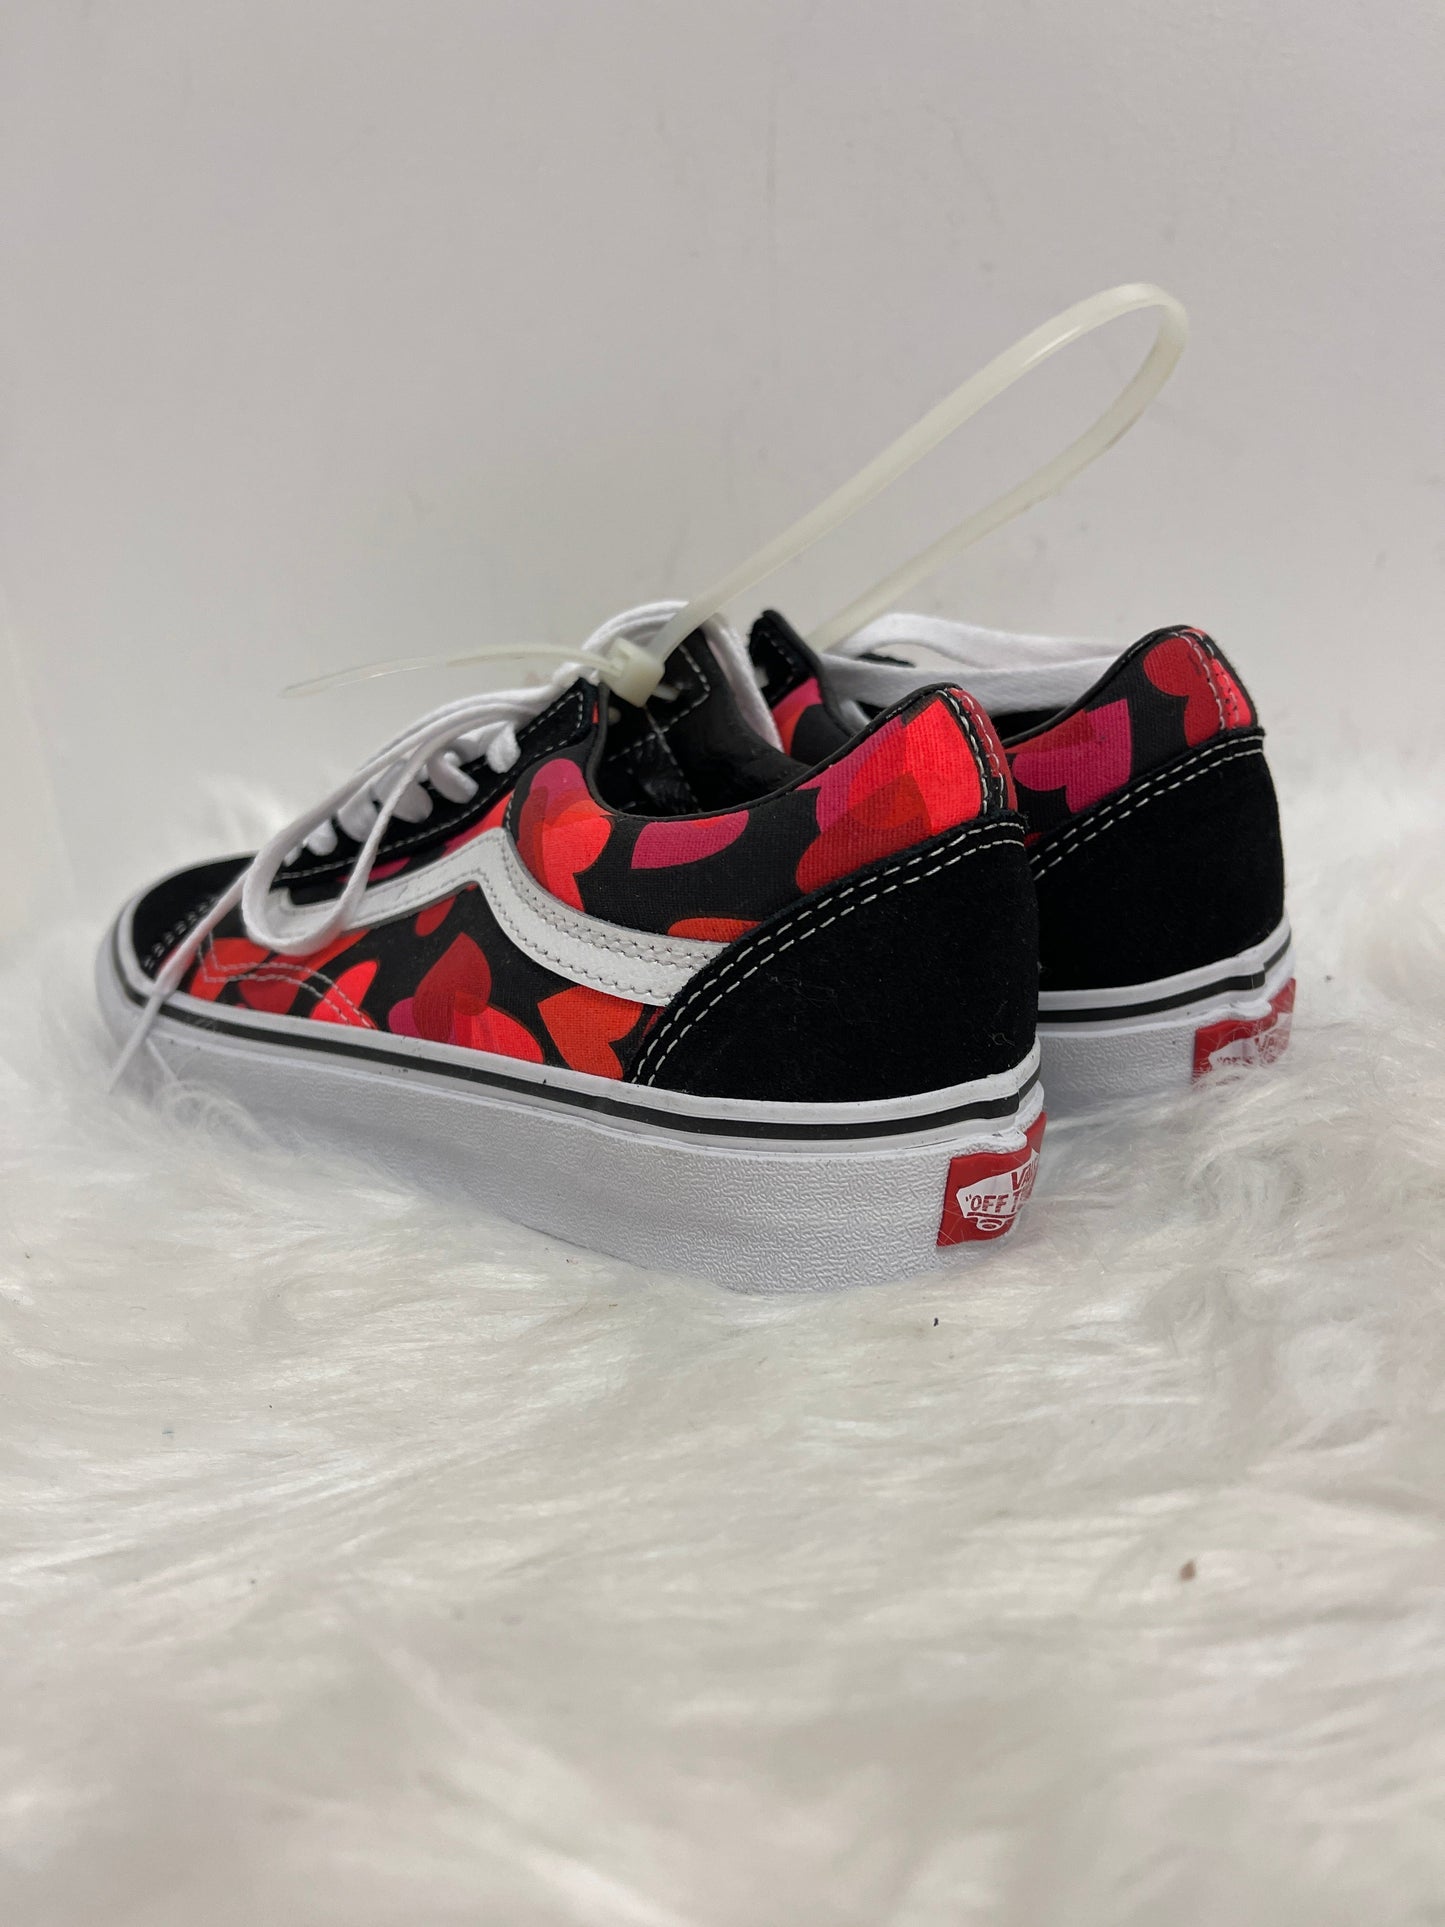 Black & Red Shoes Sneakers Vans, Size 7